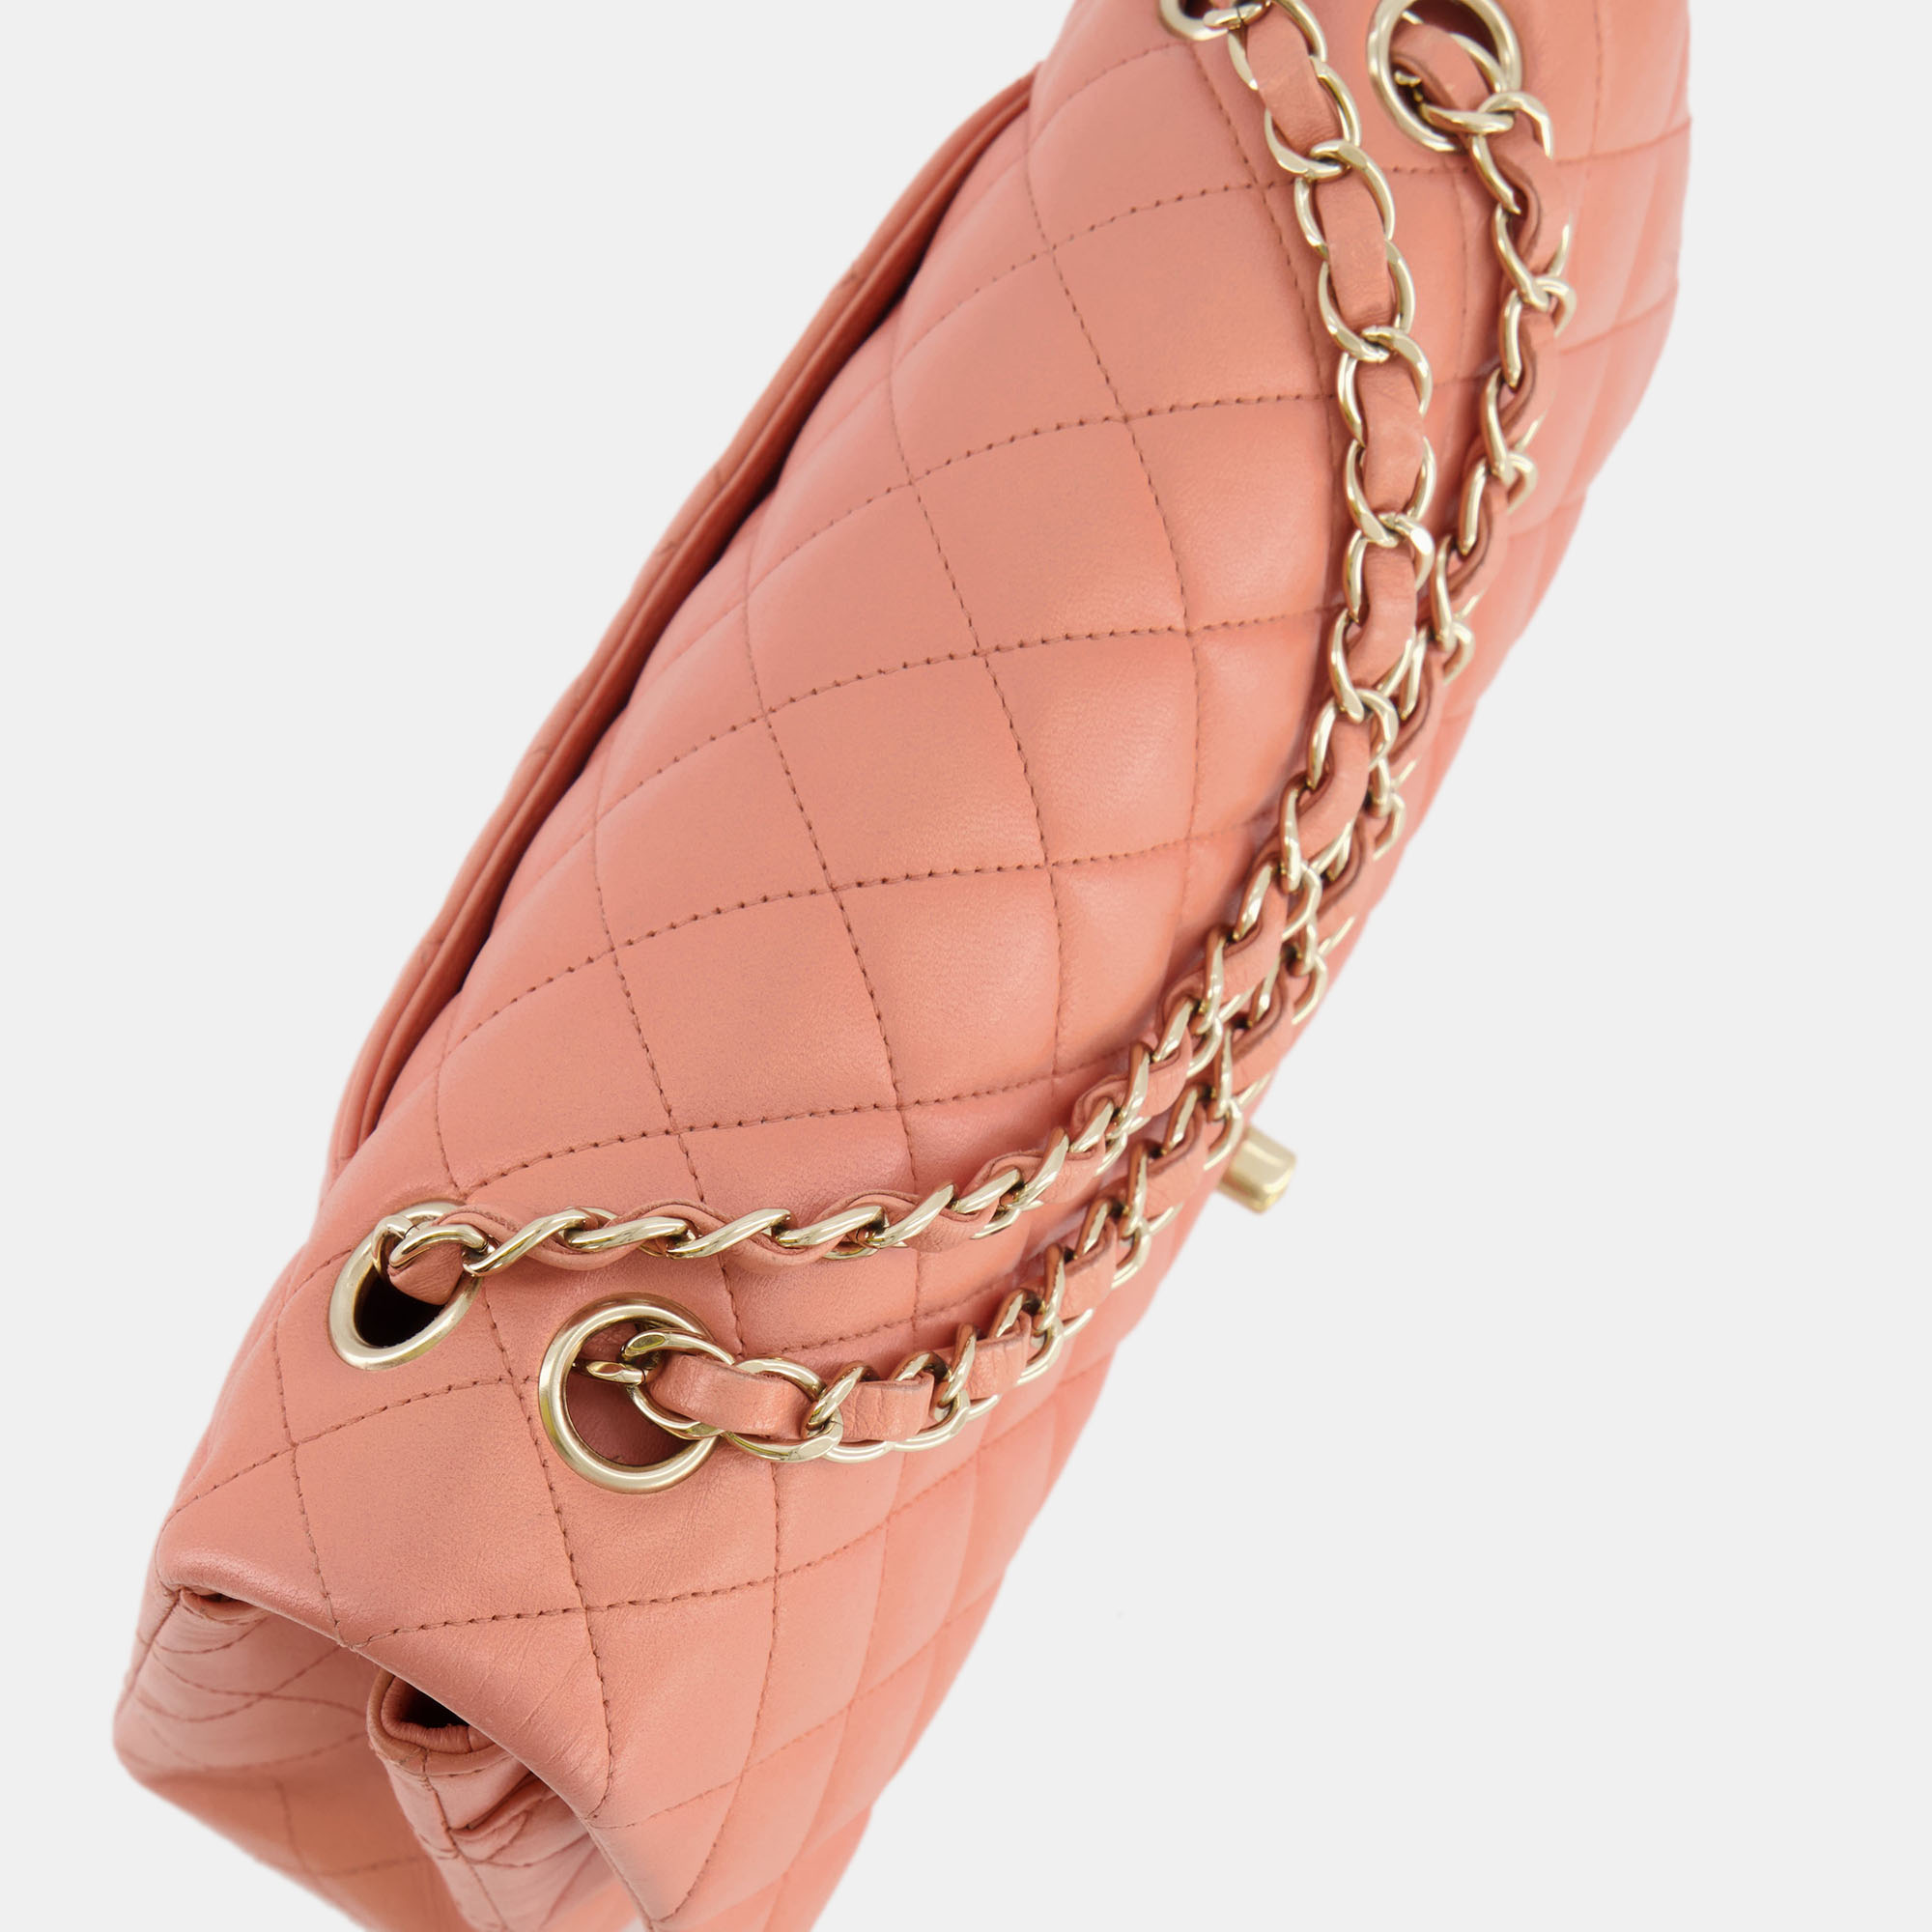 Chanel Peach Pink Lambskin Medium Classic Double Flap Bag With Champagne Gold Hardware